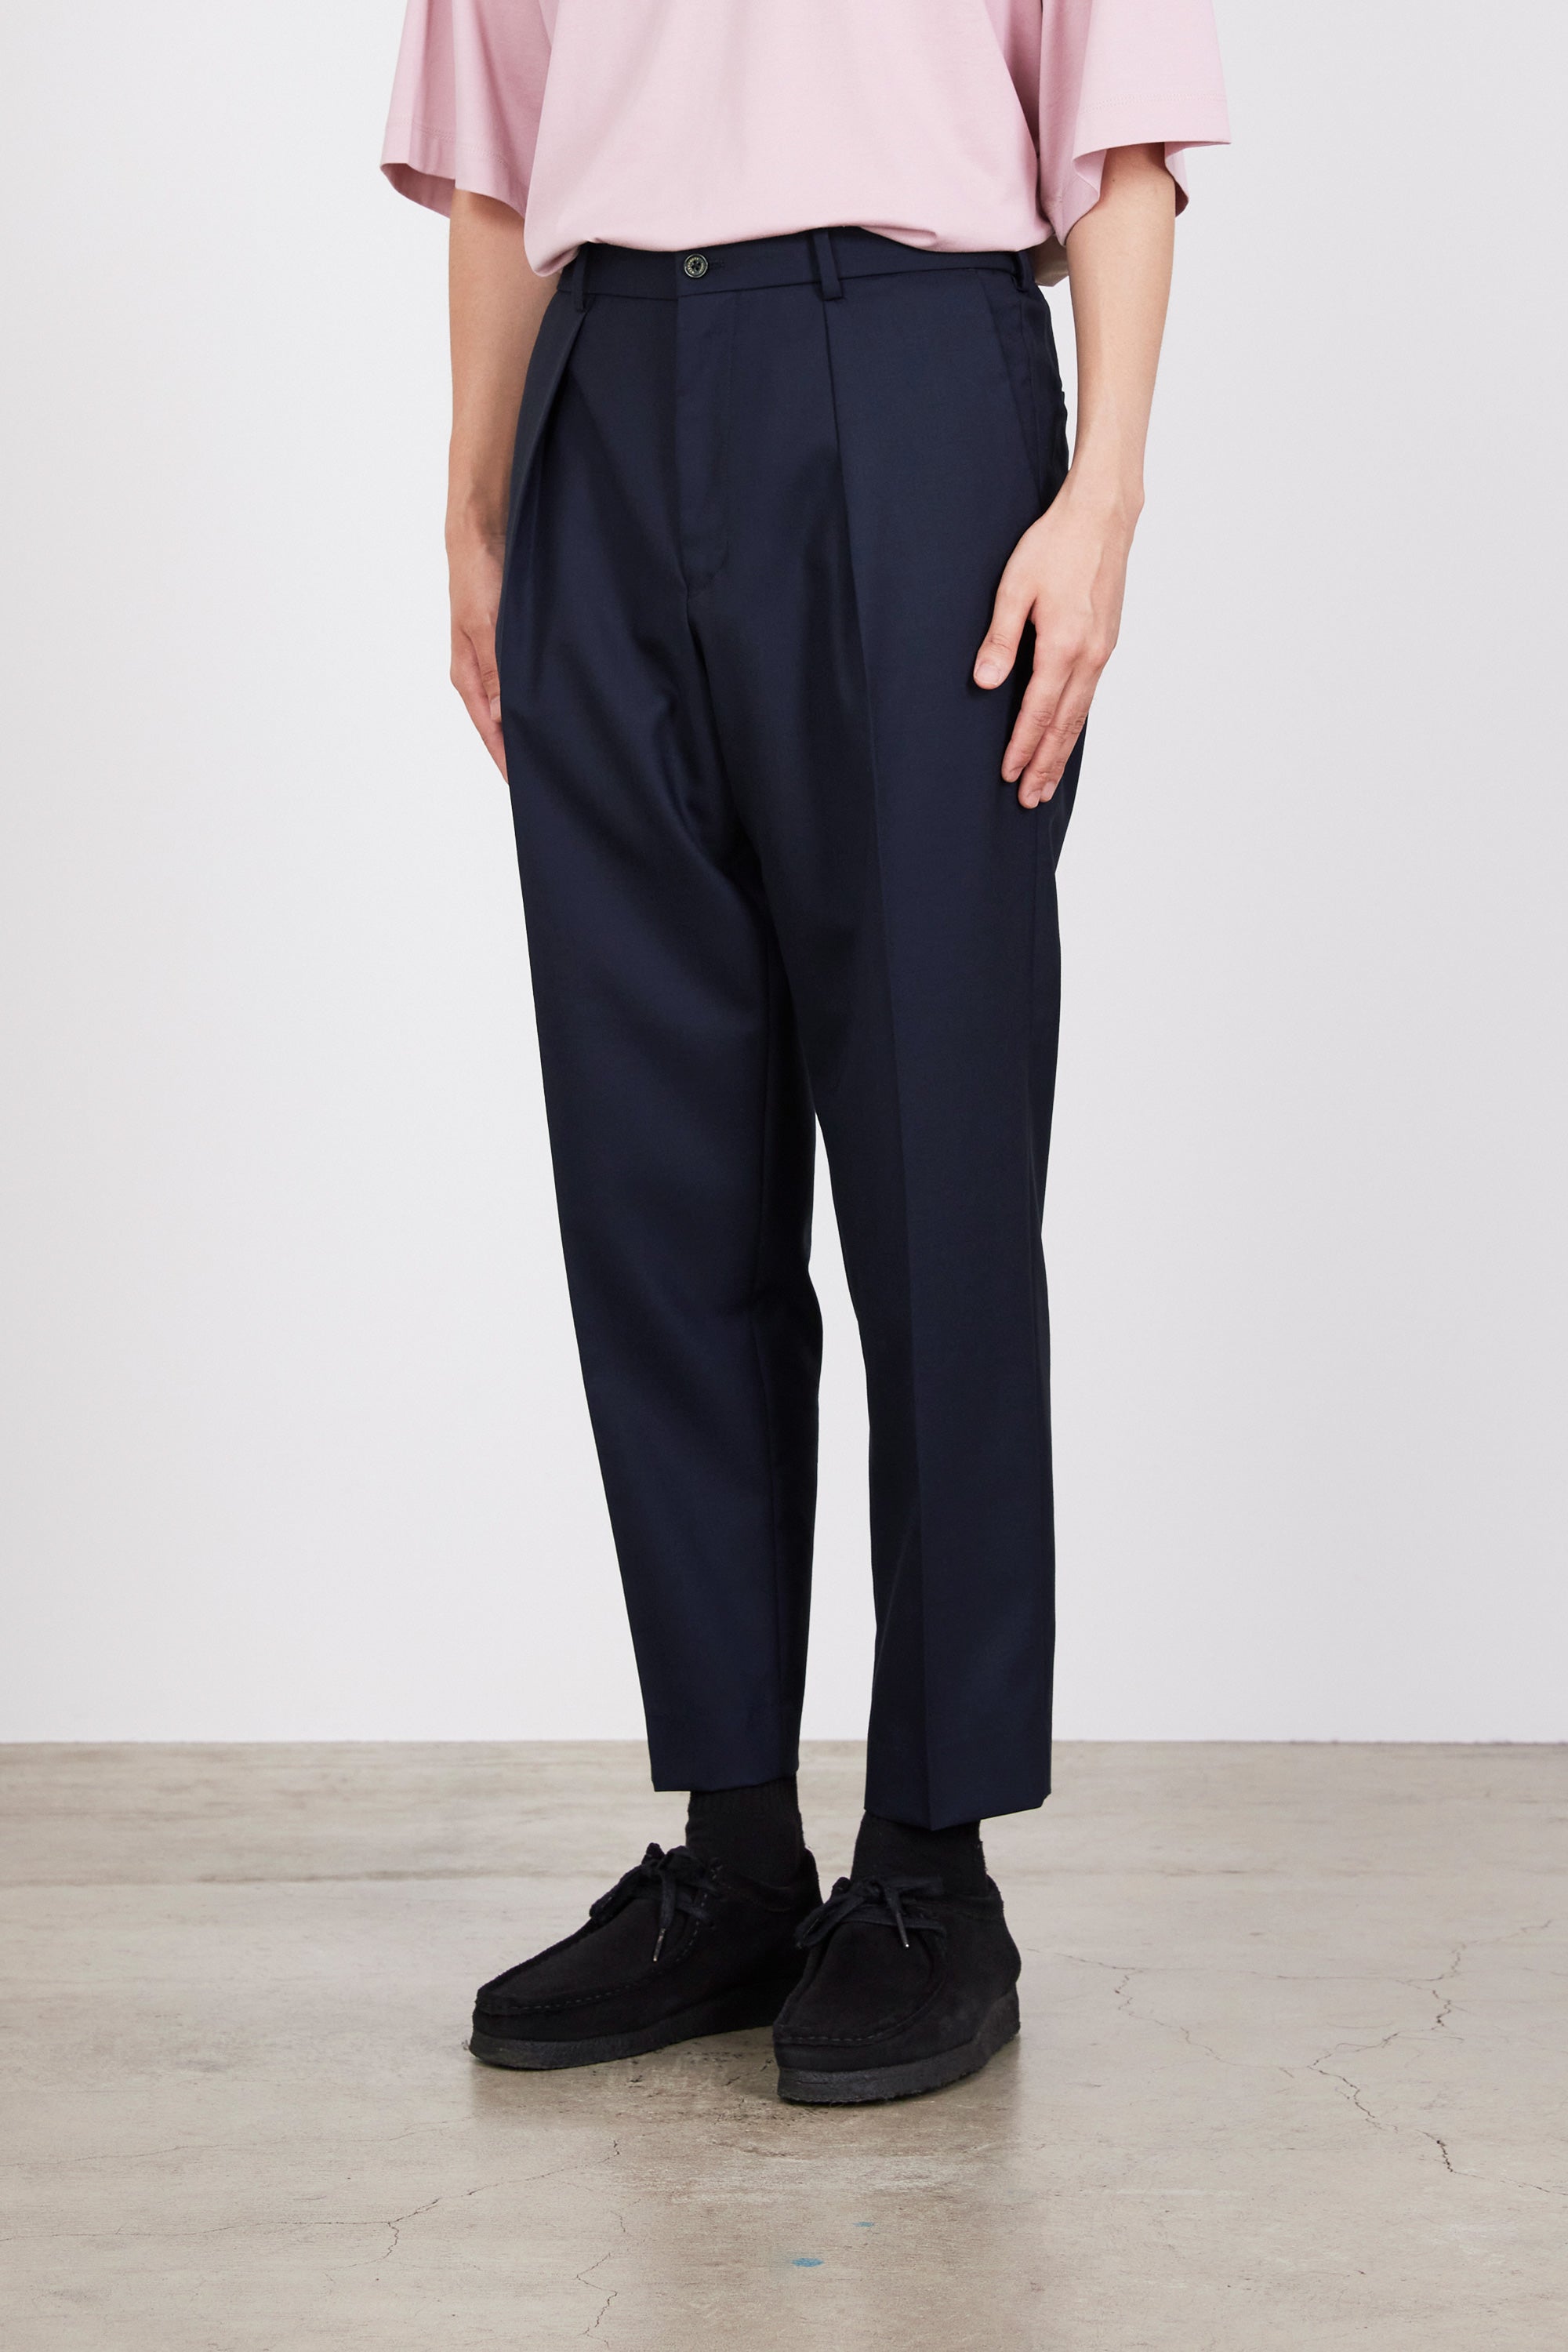 ORGANIC WOOL TROPICAL PEGTOP TROUSERS, Navy